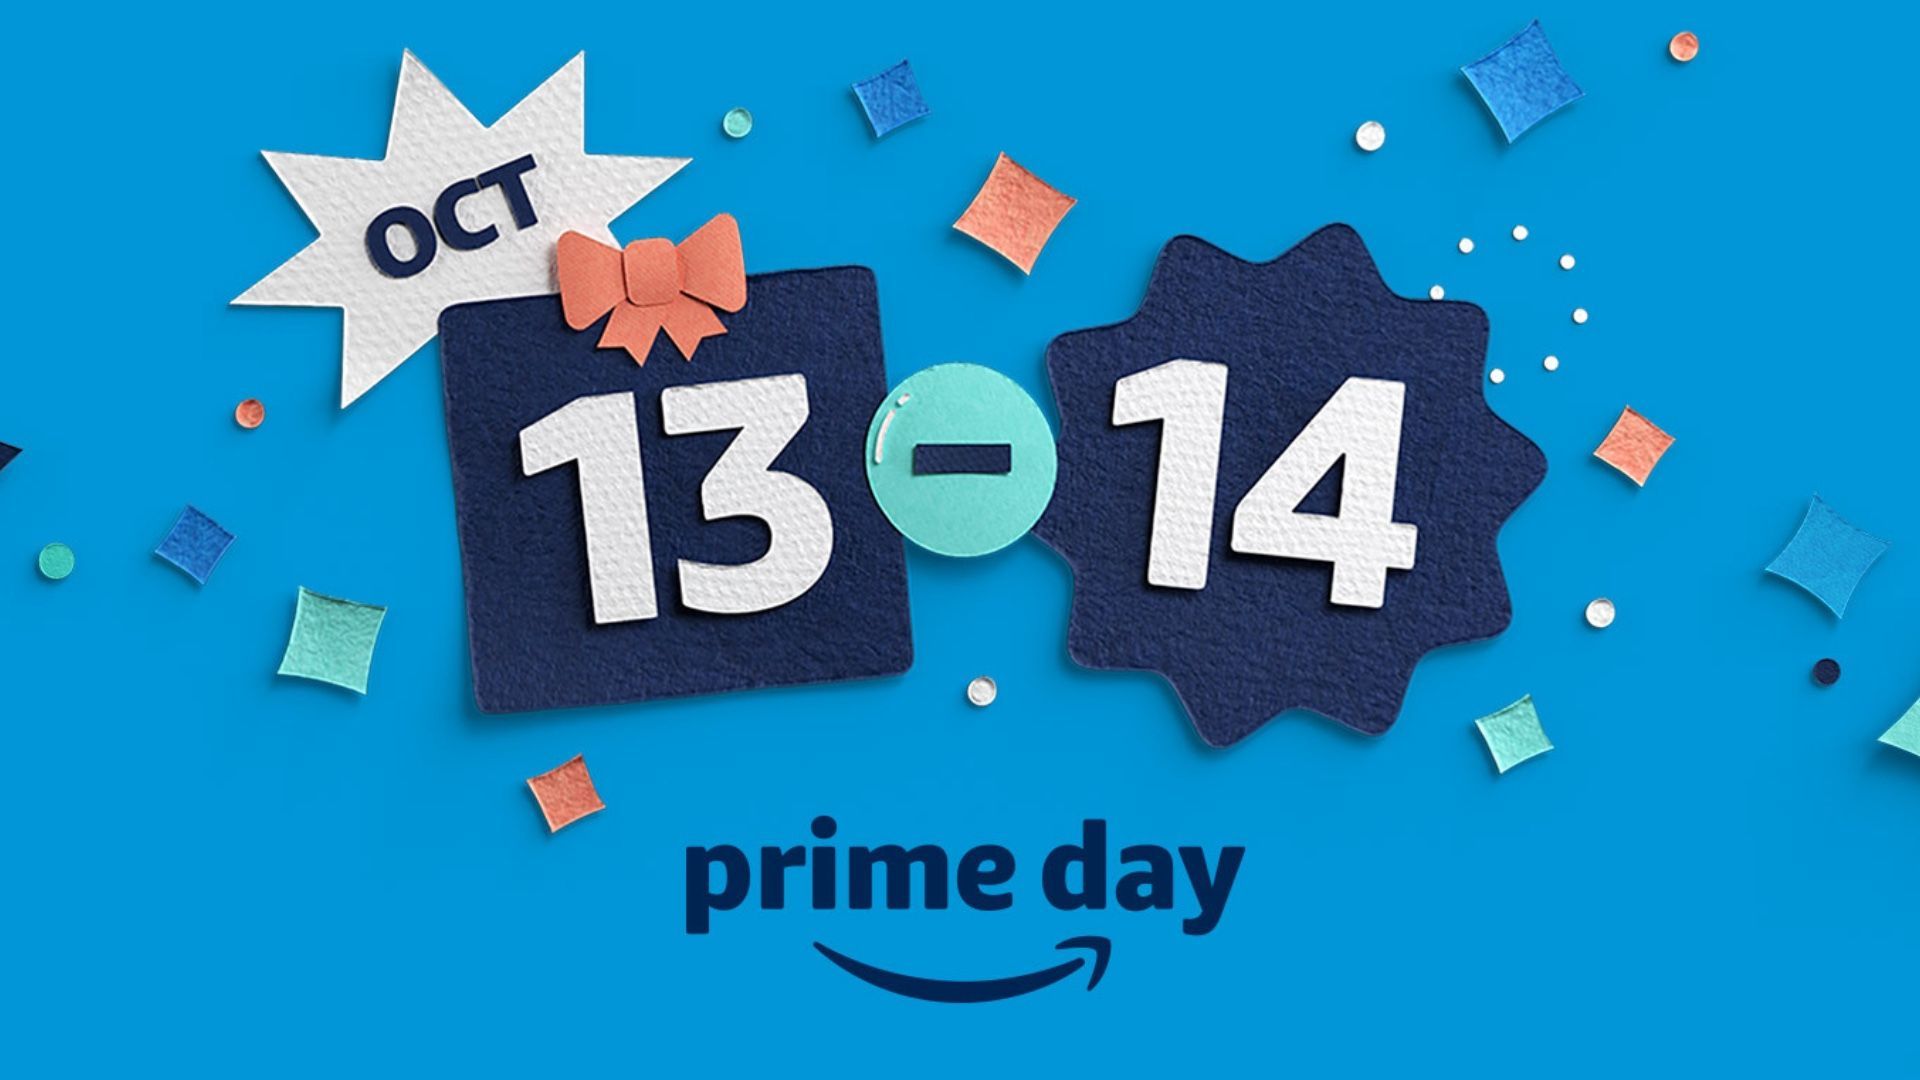 Prime Day 2020 to happen on October 13-14